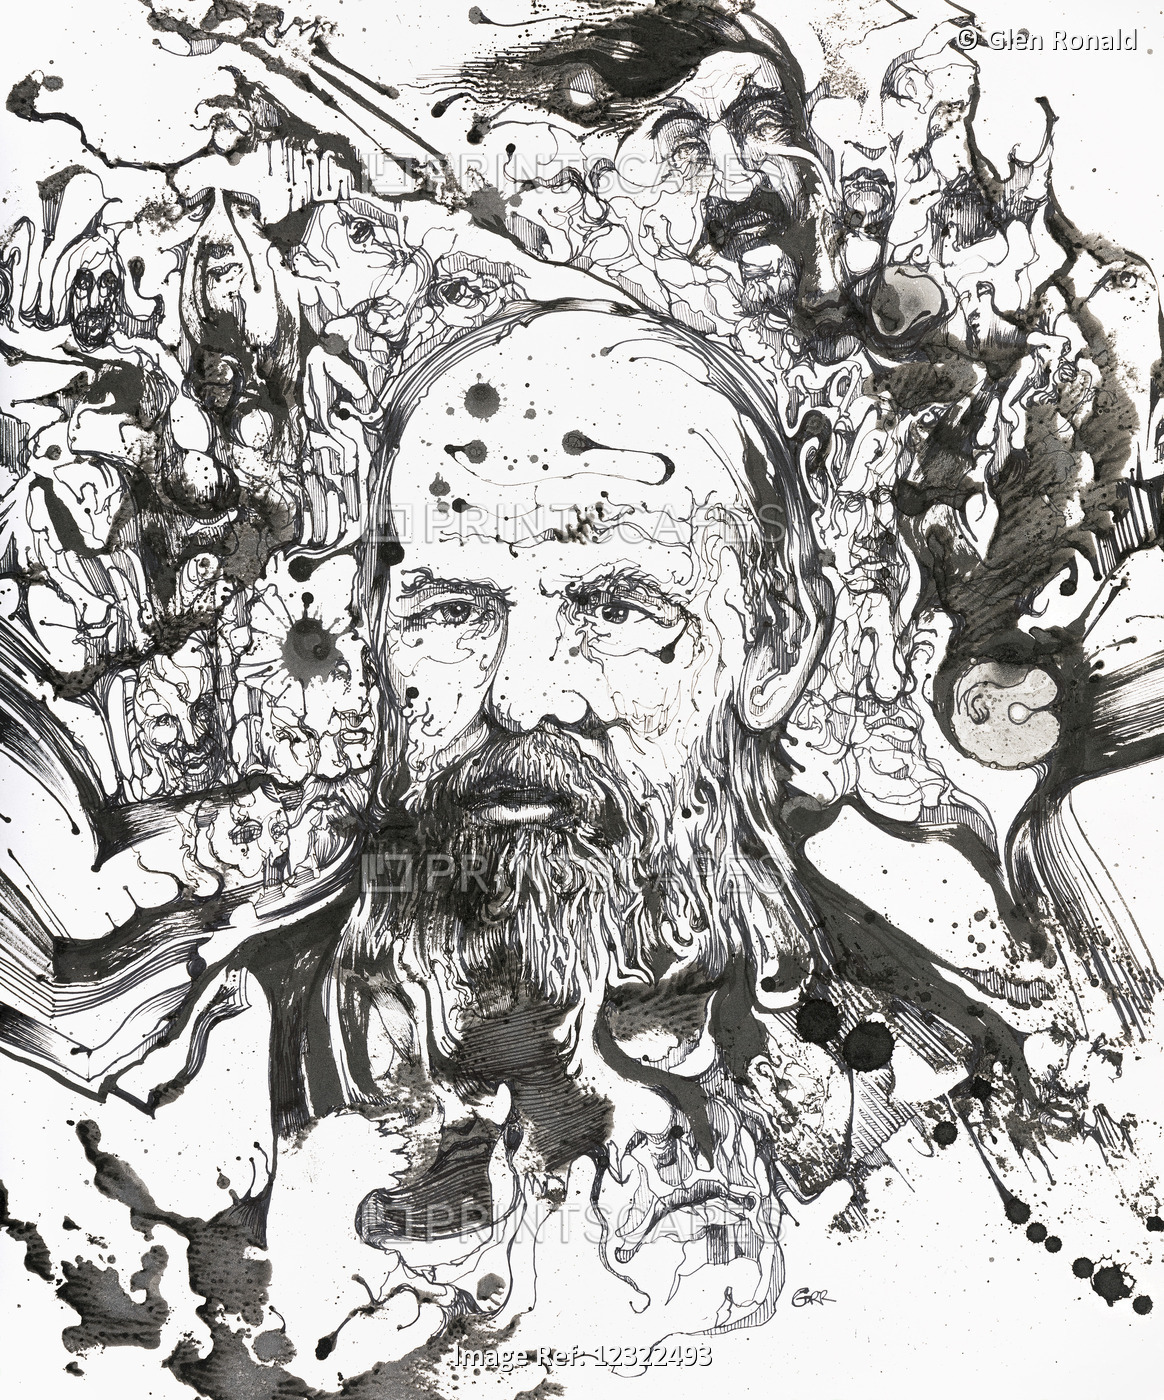 Abstract Portrait Of Dostoevsky, Black and White Artwork